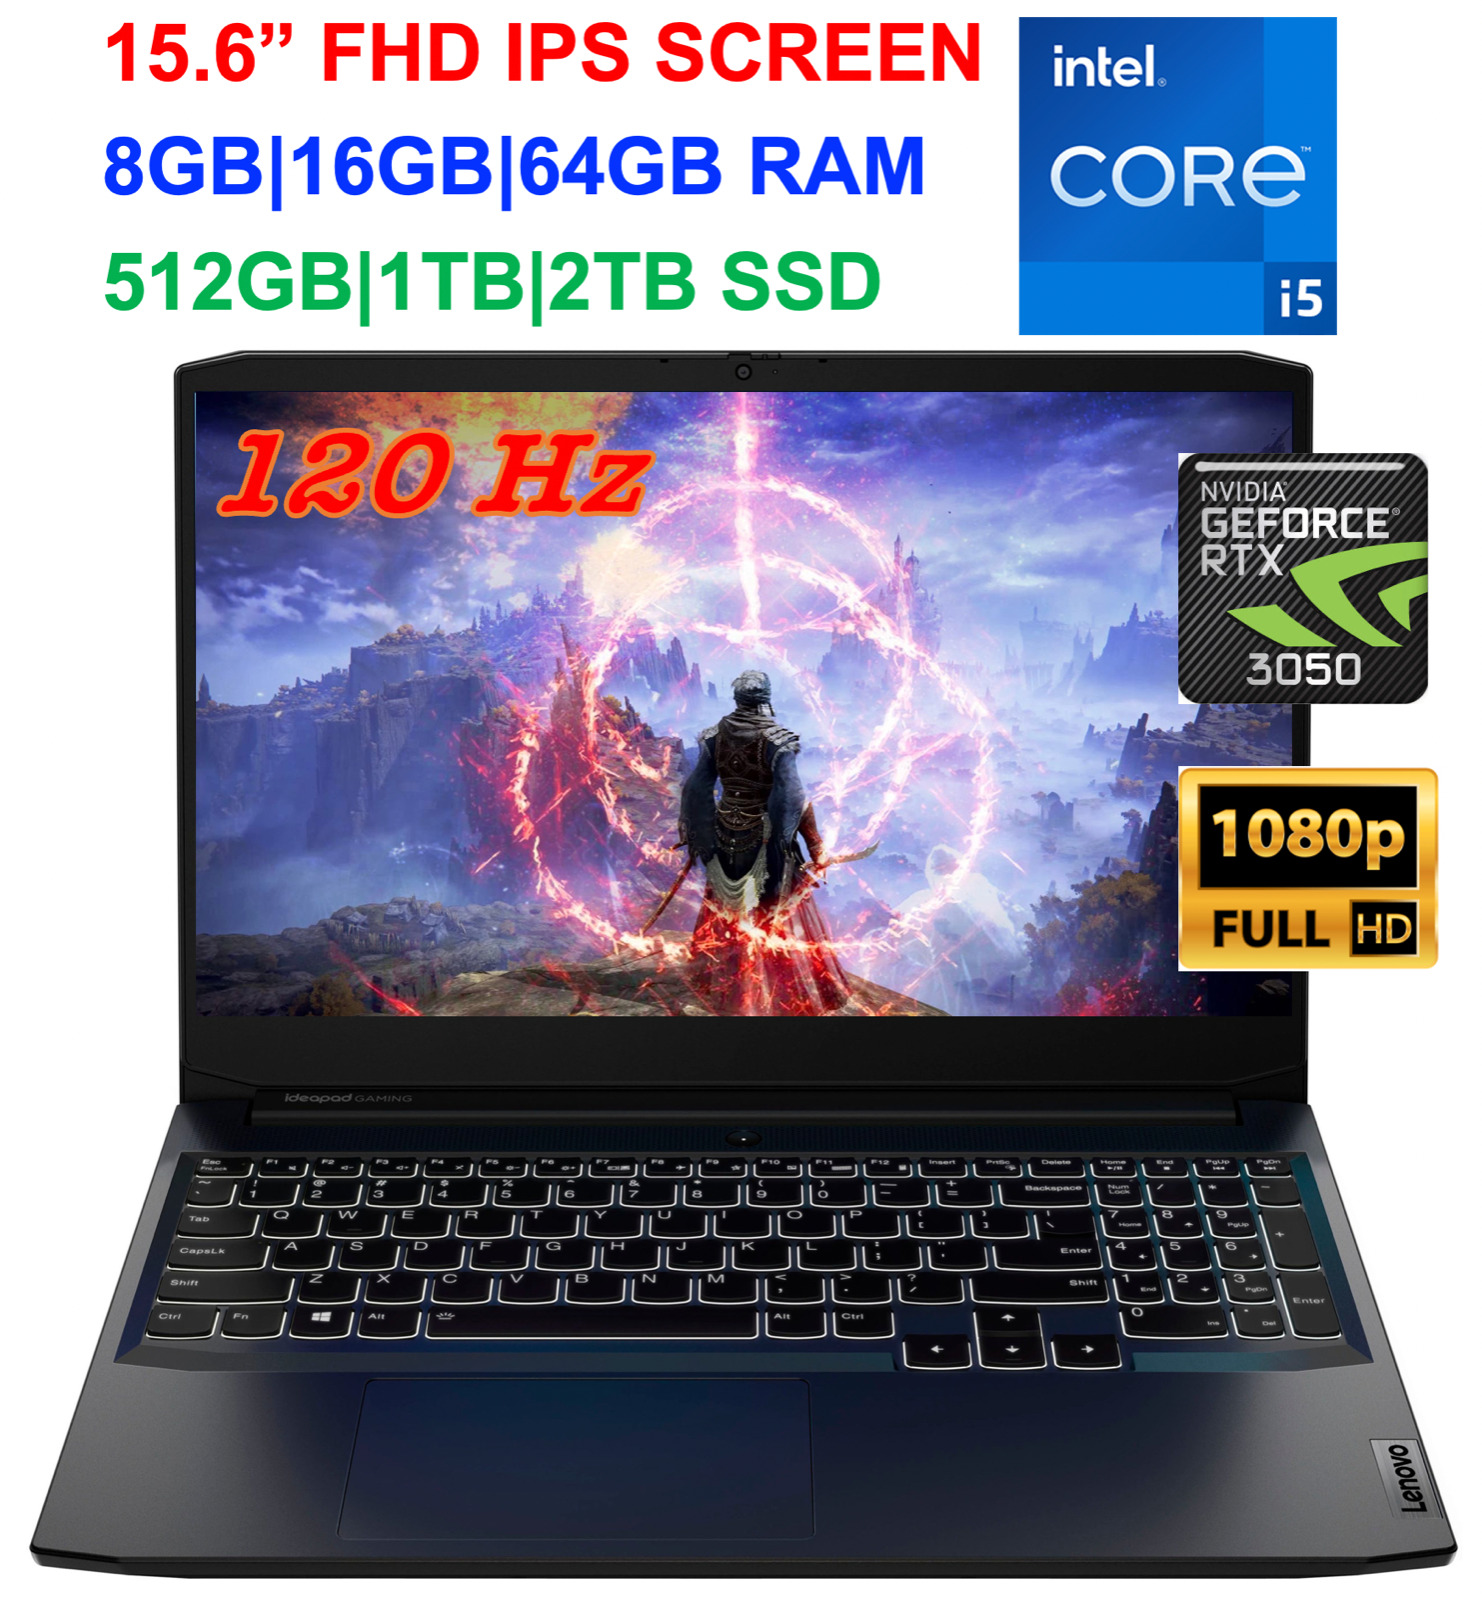 Lenovo IdeaPad Gaming 3 15.6 i5-11300H, RTX 3050, 120Hz Upto 64GB RAM & 2TB SSD. Available Now for 739.00